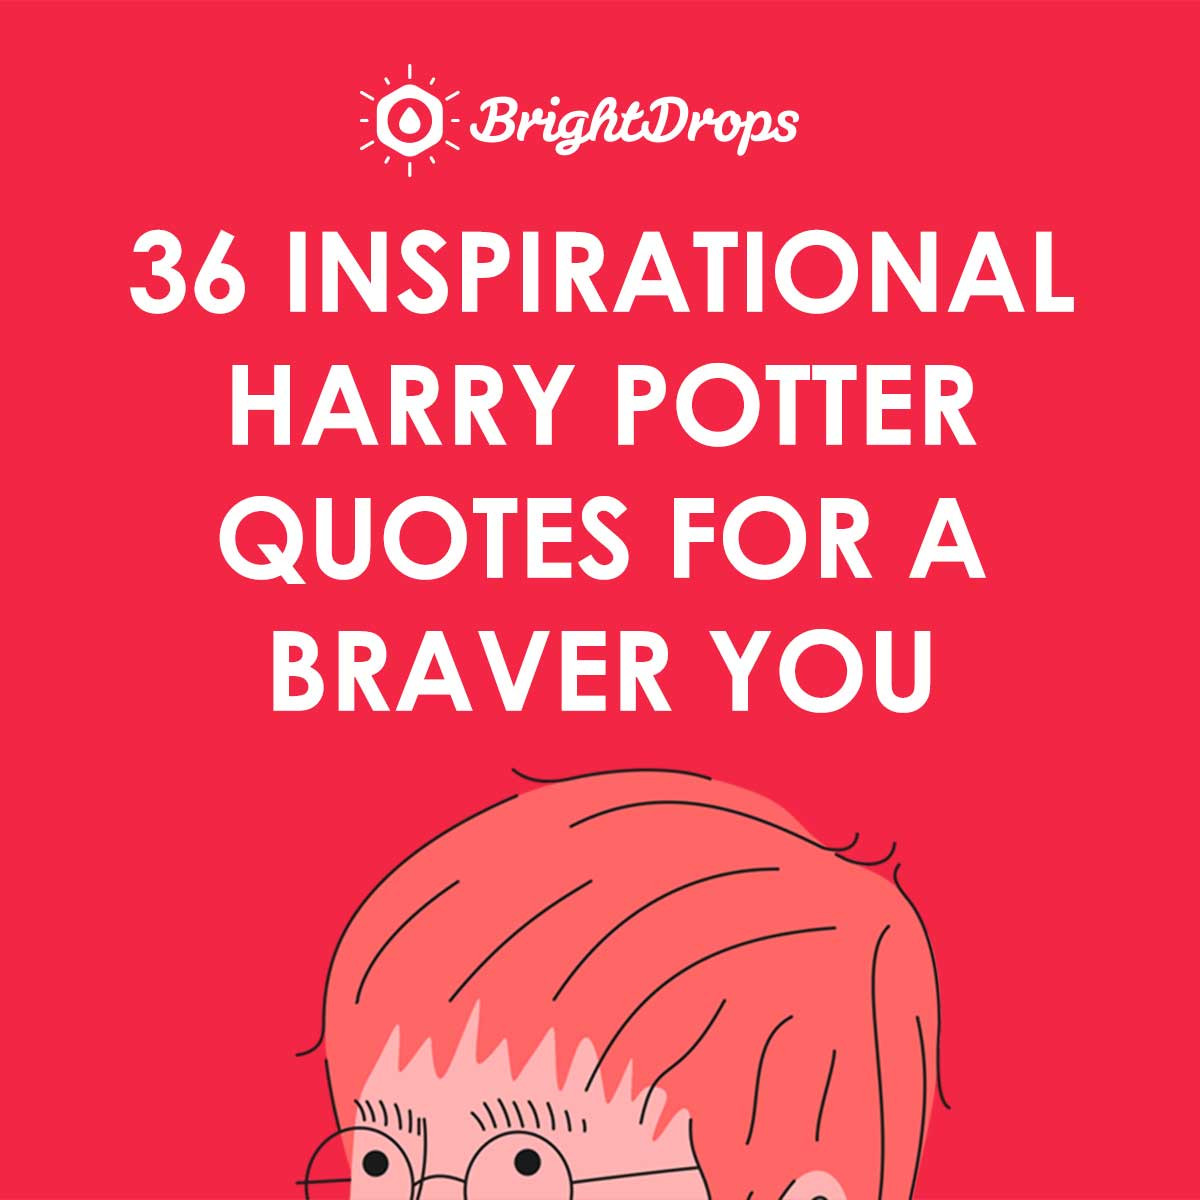 Harry Potter Quotes Inspirational
 36 Inspirational Harry Potter Quotes for a Braver You